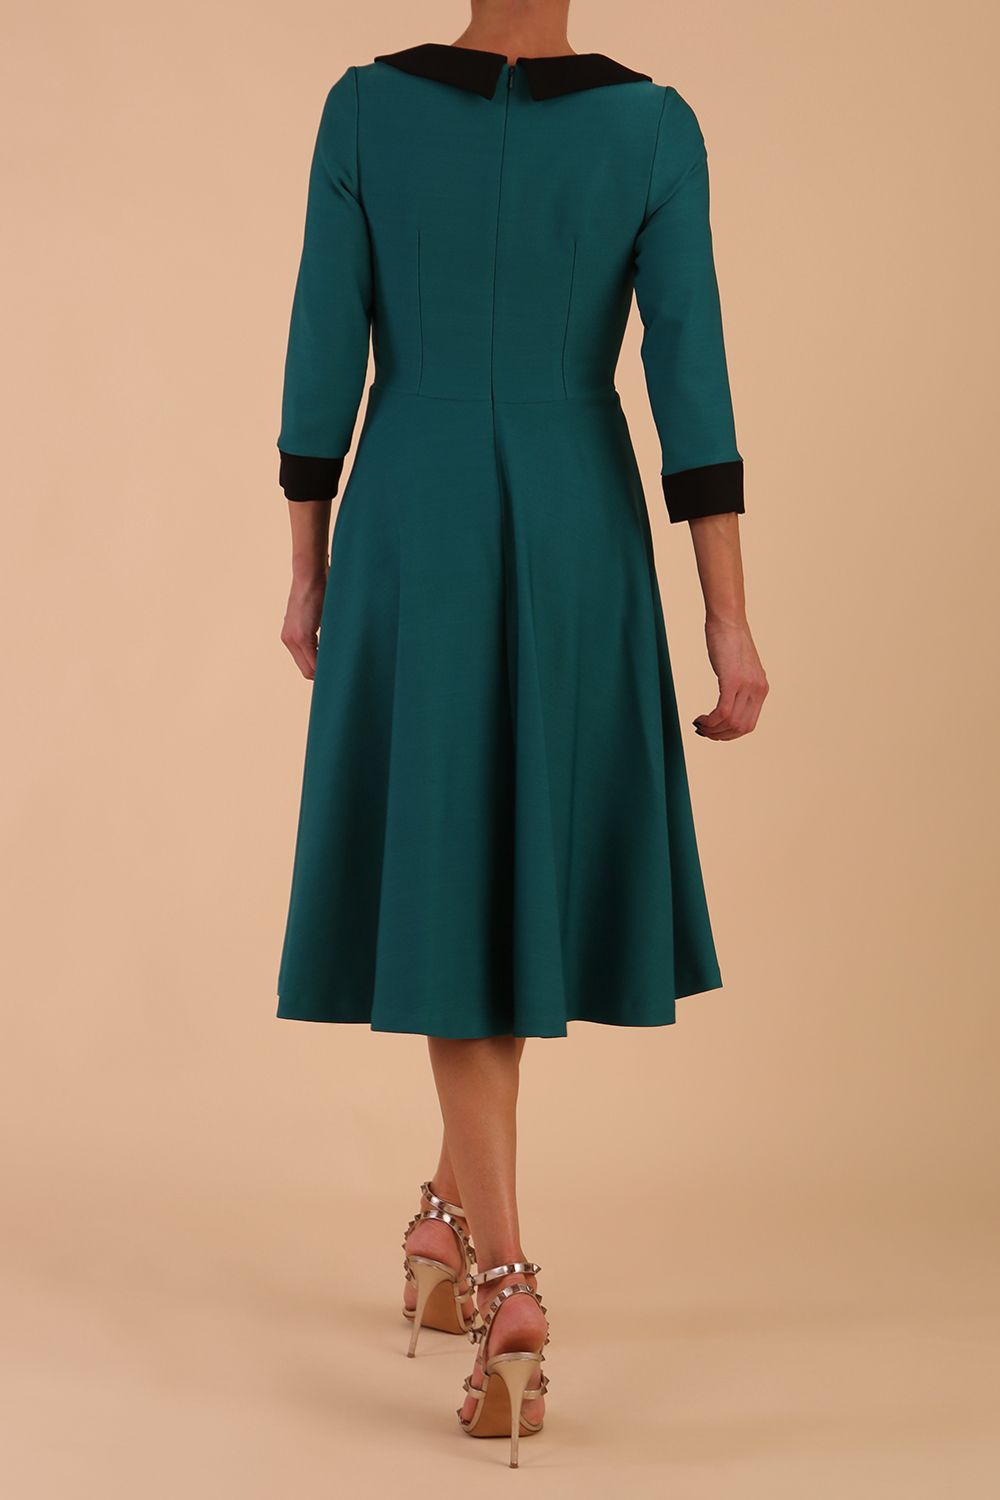 Model wearing Diva catwalk Coralia swing dress in pacific green / Black contrast with three quarter sleeve figure fitted back image